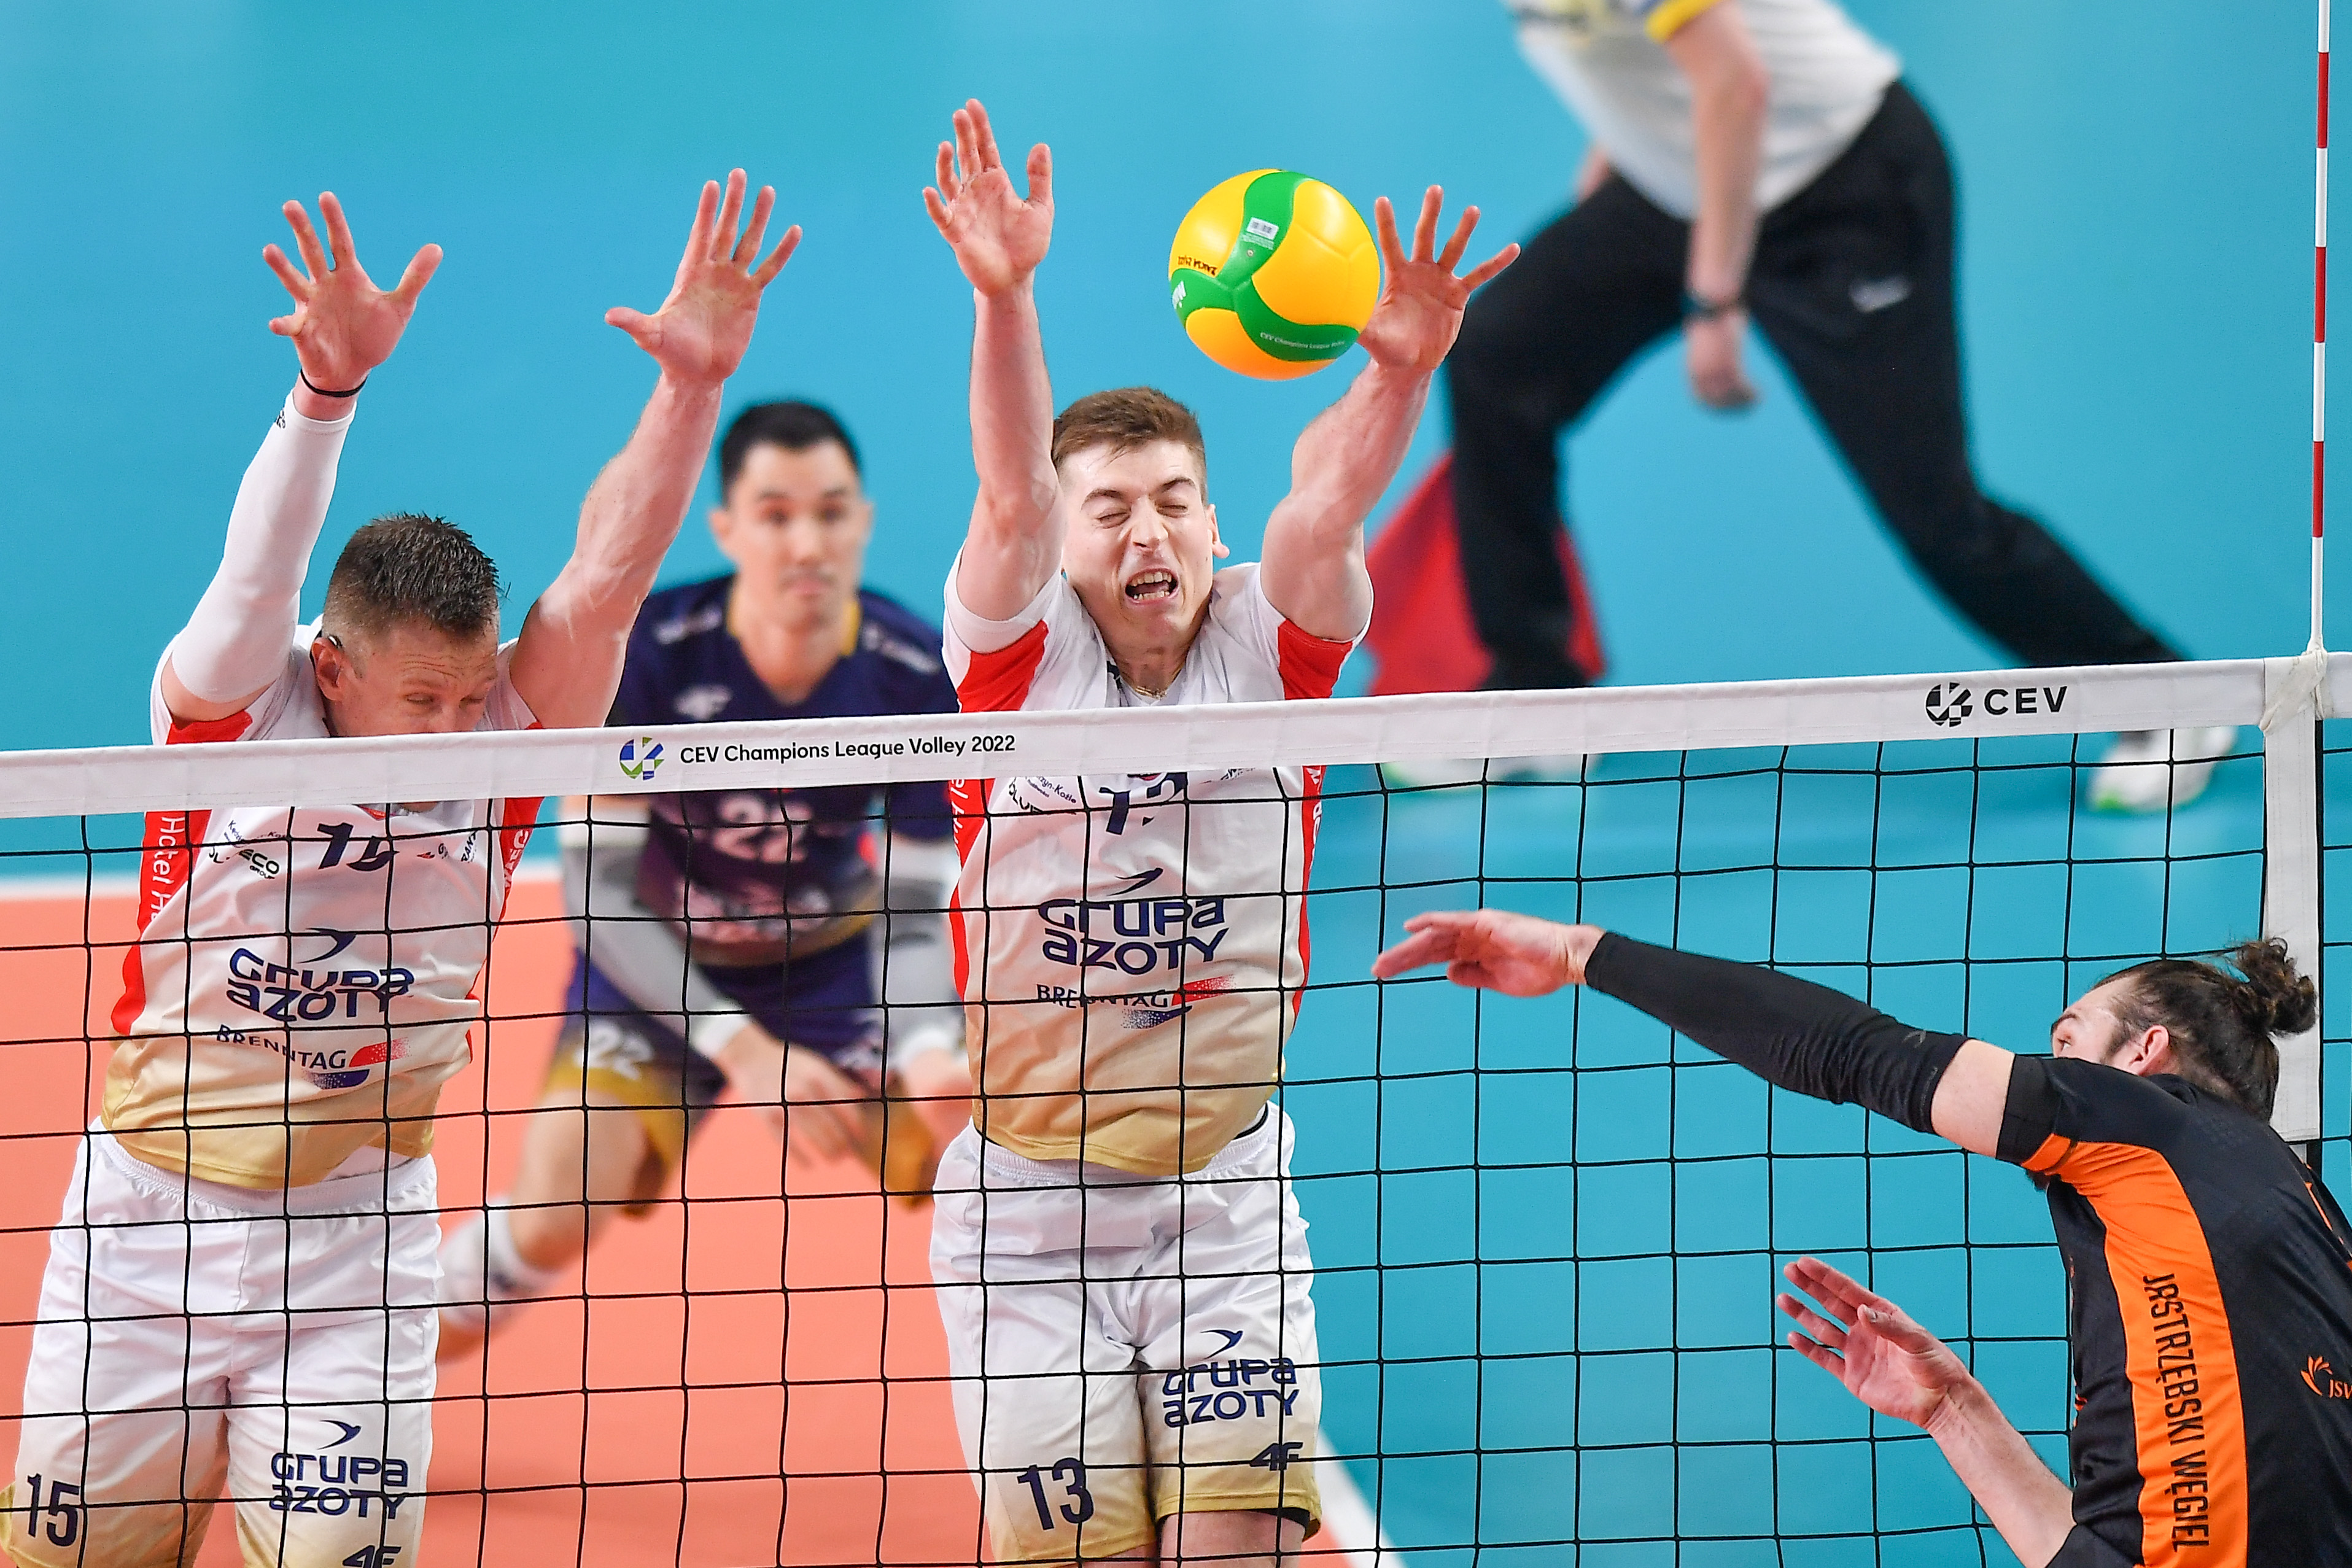 ZAKSA emerge victorious from all-Polish semi-final to fight for the ...